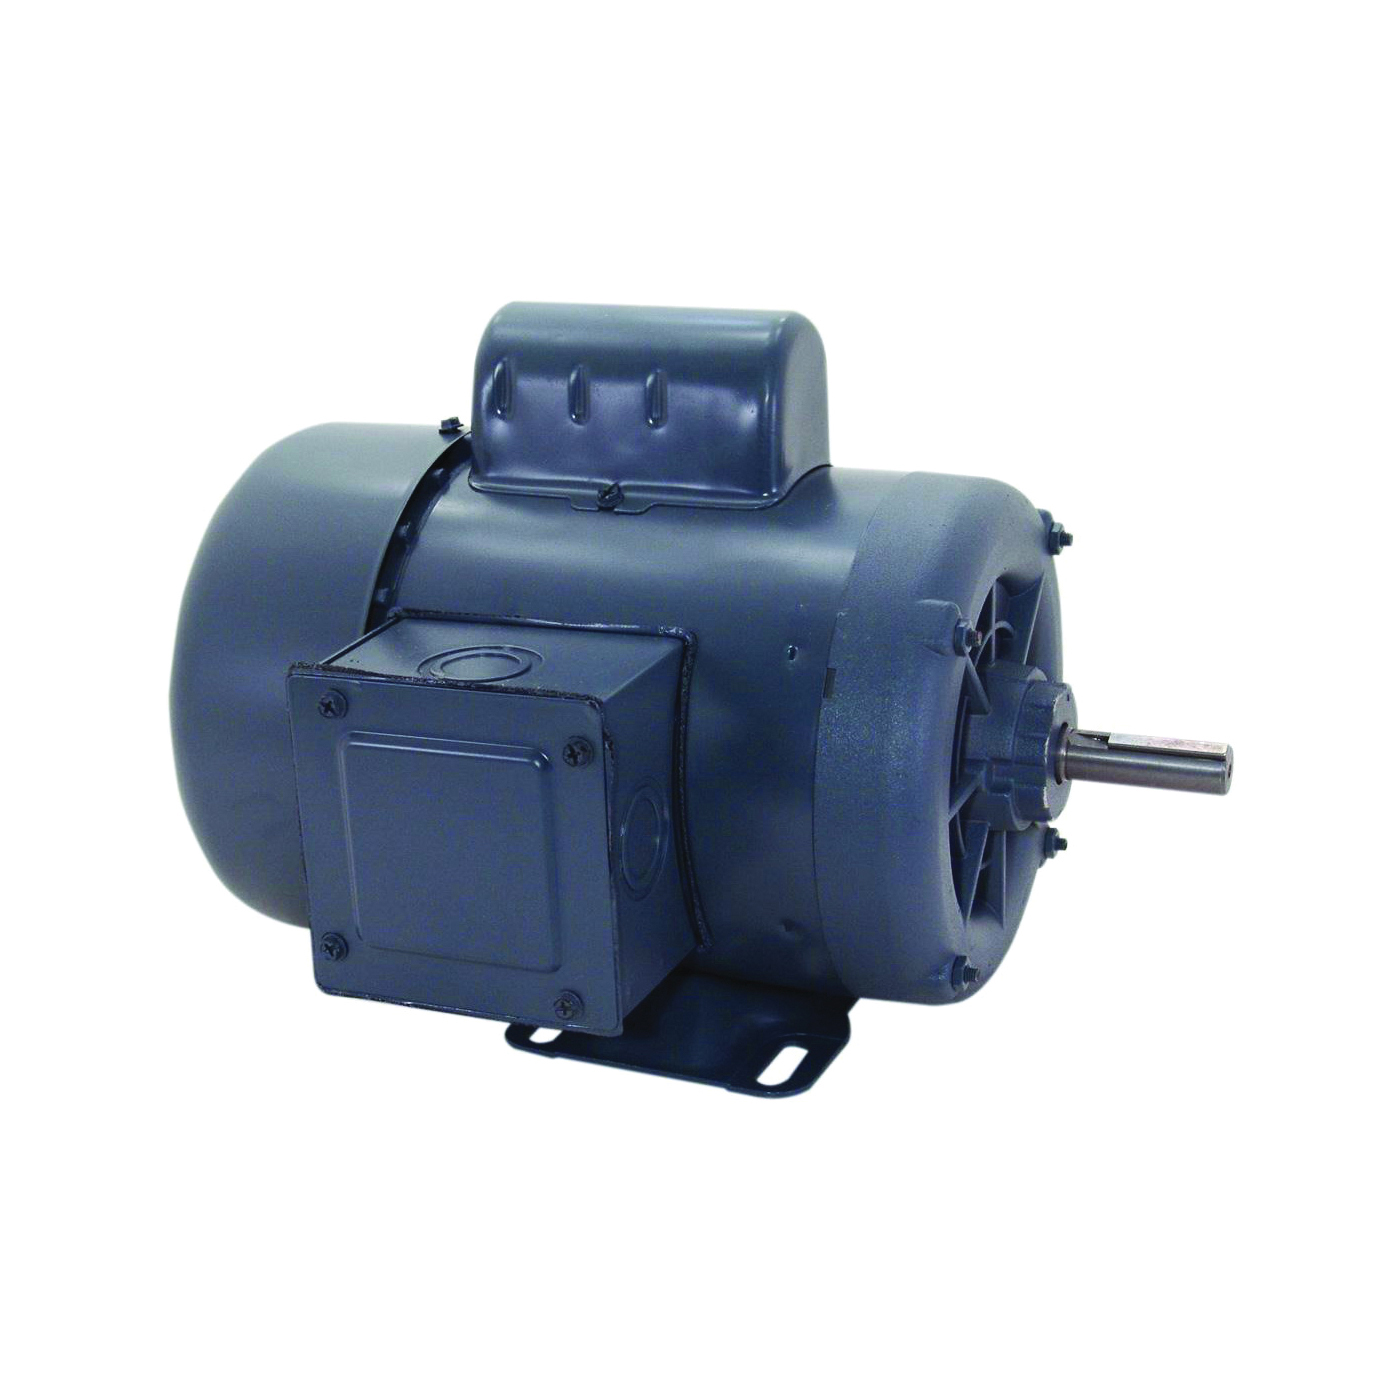 C521 Electric Motor, 0.5 hp, 1-Phase, 115/208/230 V, 5/8 in Dia x 1-7/8 in L Shaft, Ball Bearing